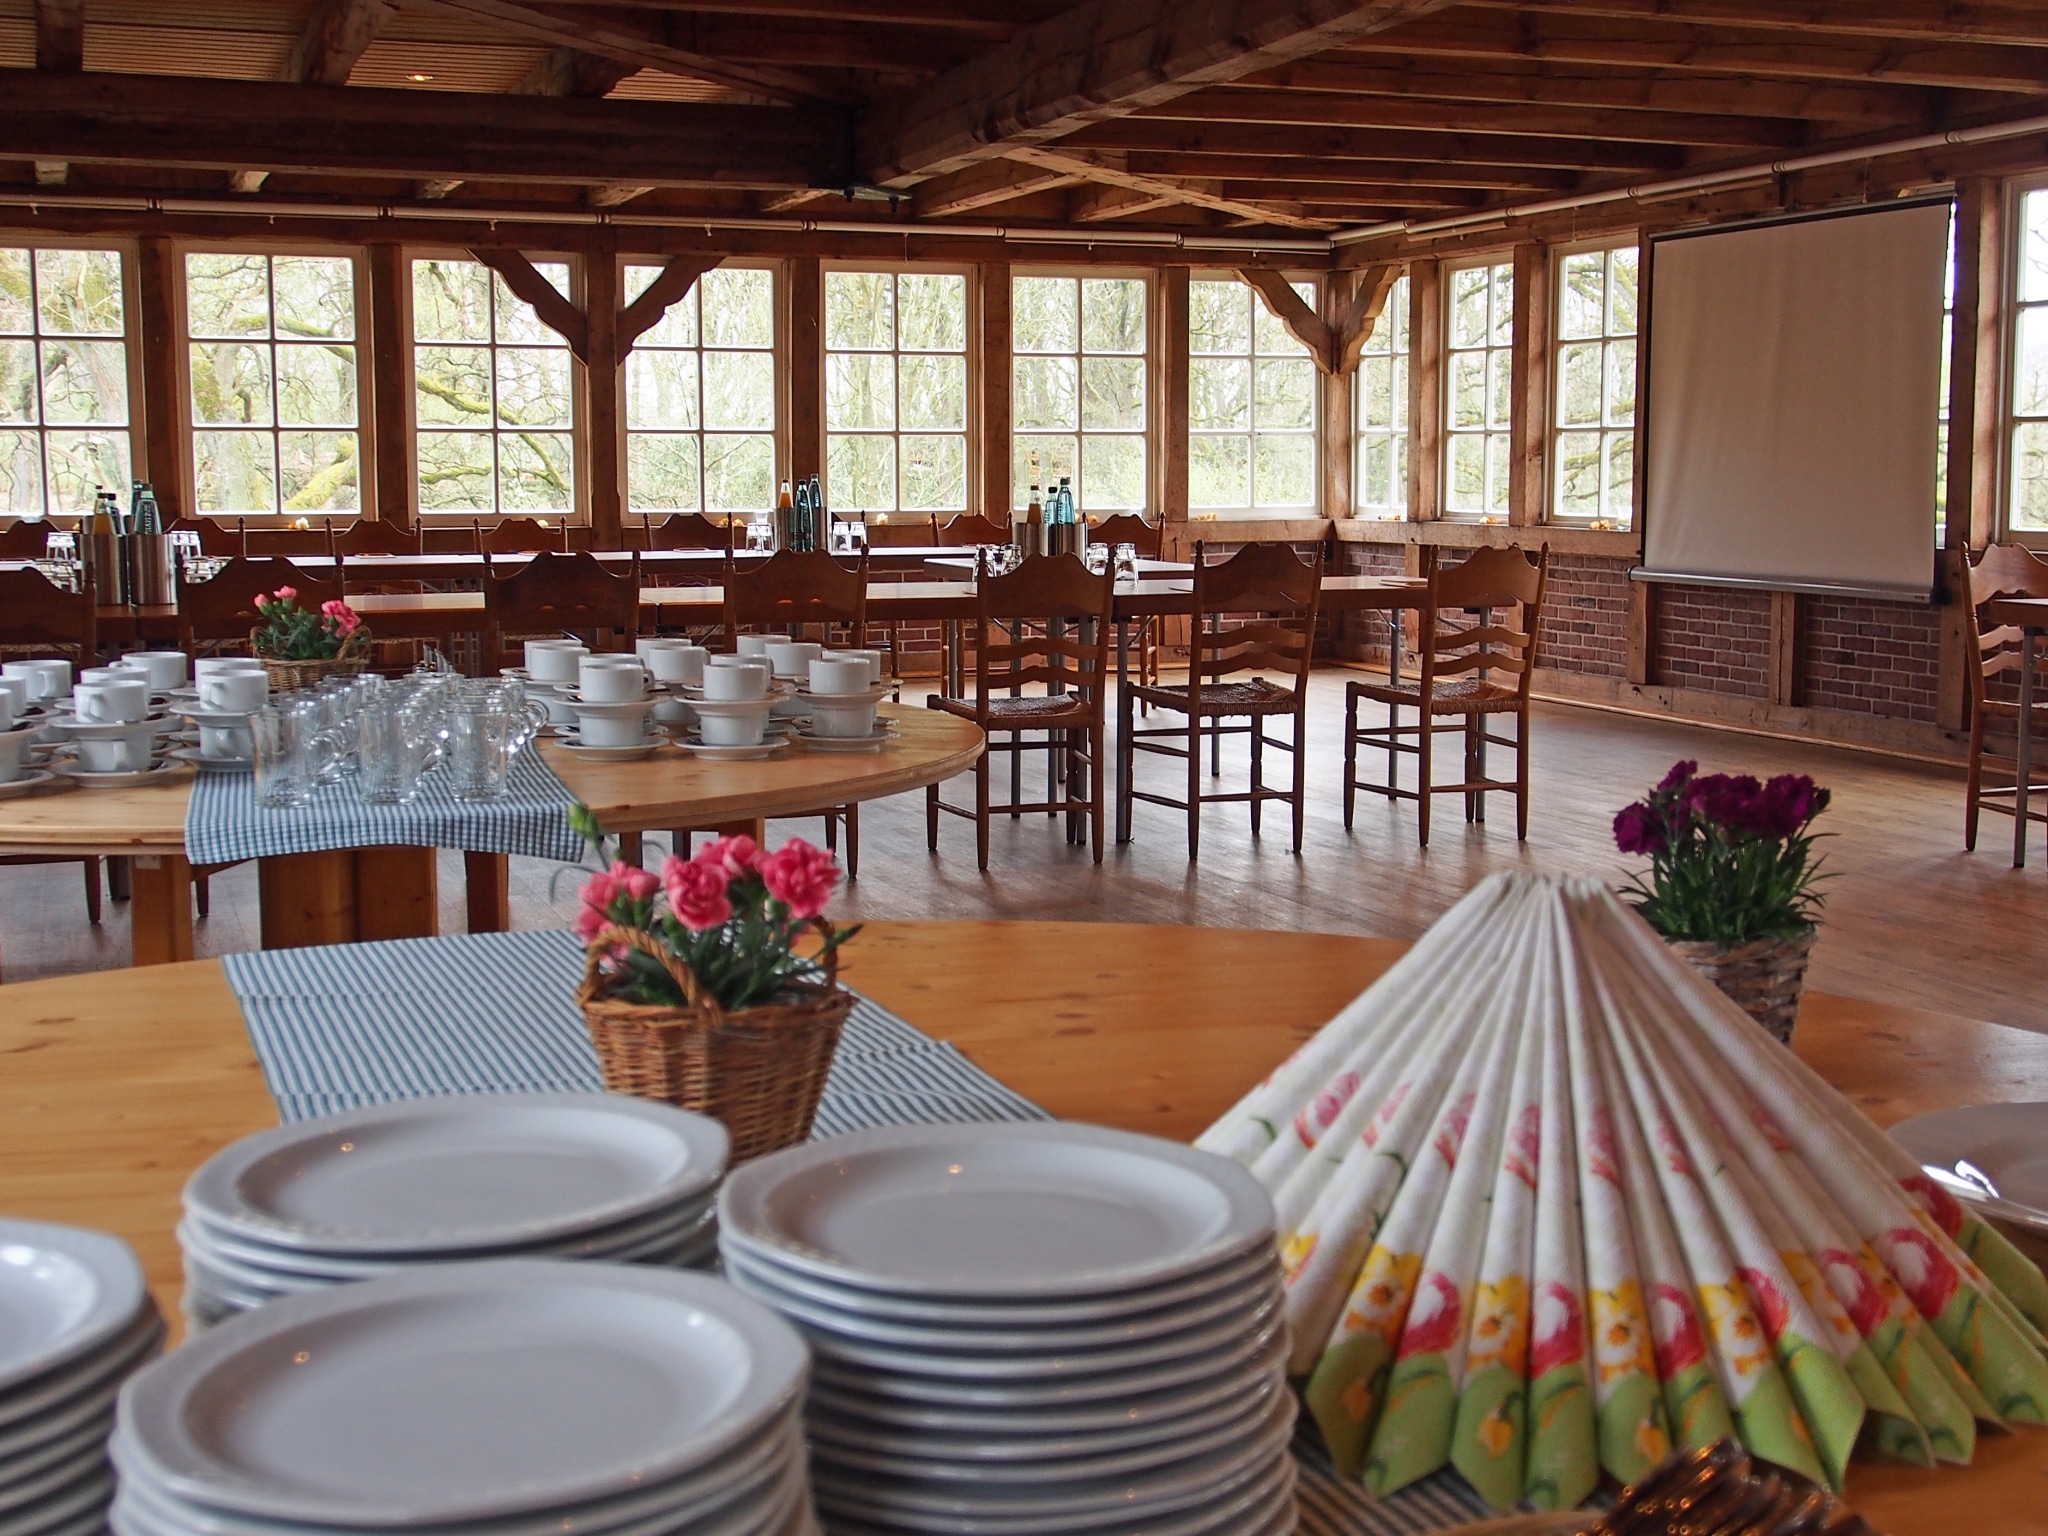 Preparations for the lunch buffet in the "Wintergarten" | Landhaus Haverbeckhof